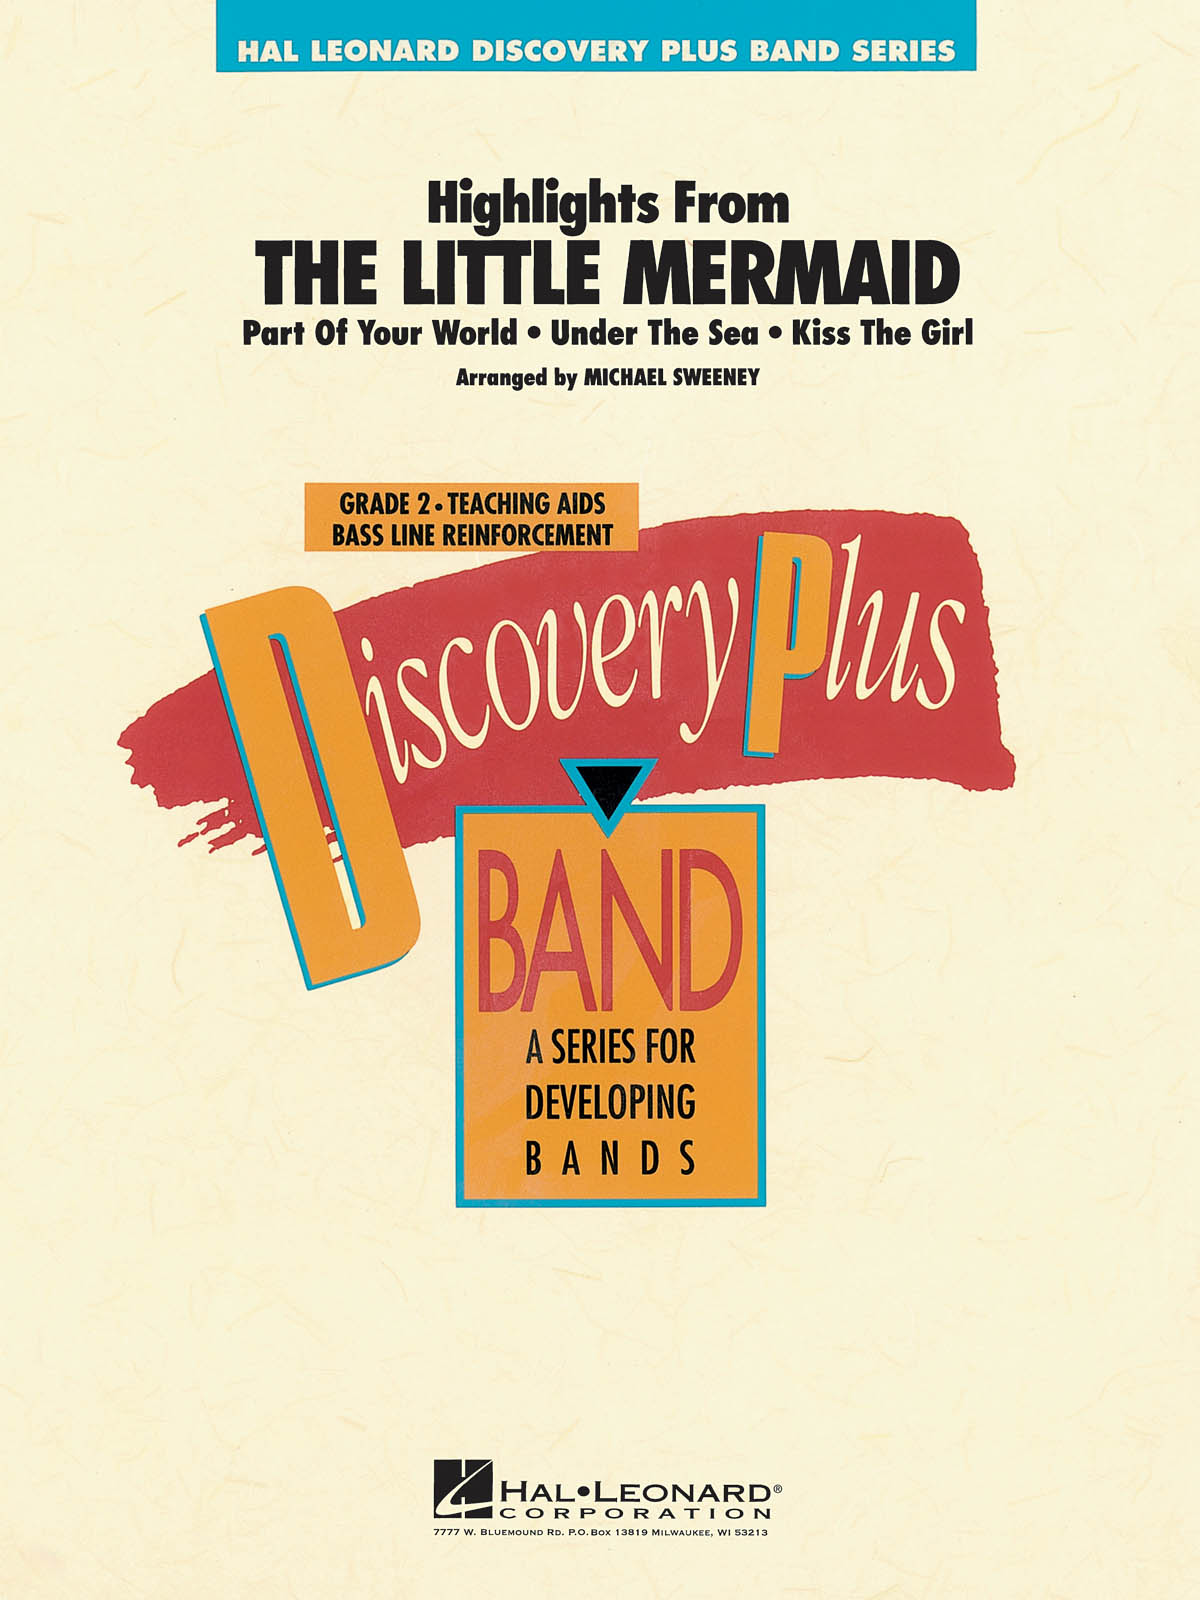 The Little Mermaid - Highlights from: Concert Band: Score & Parts